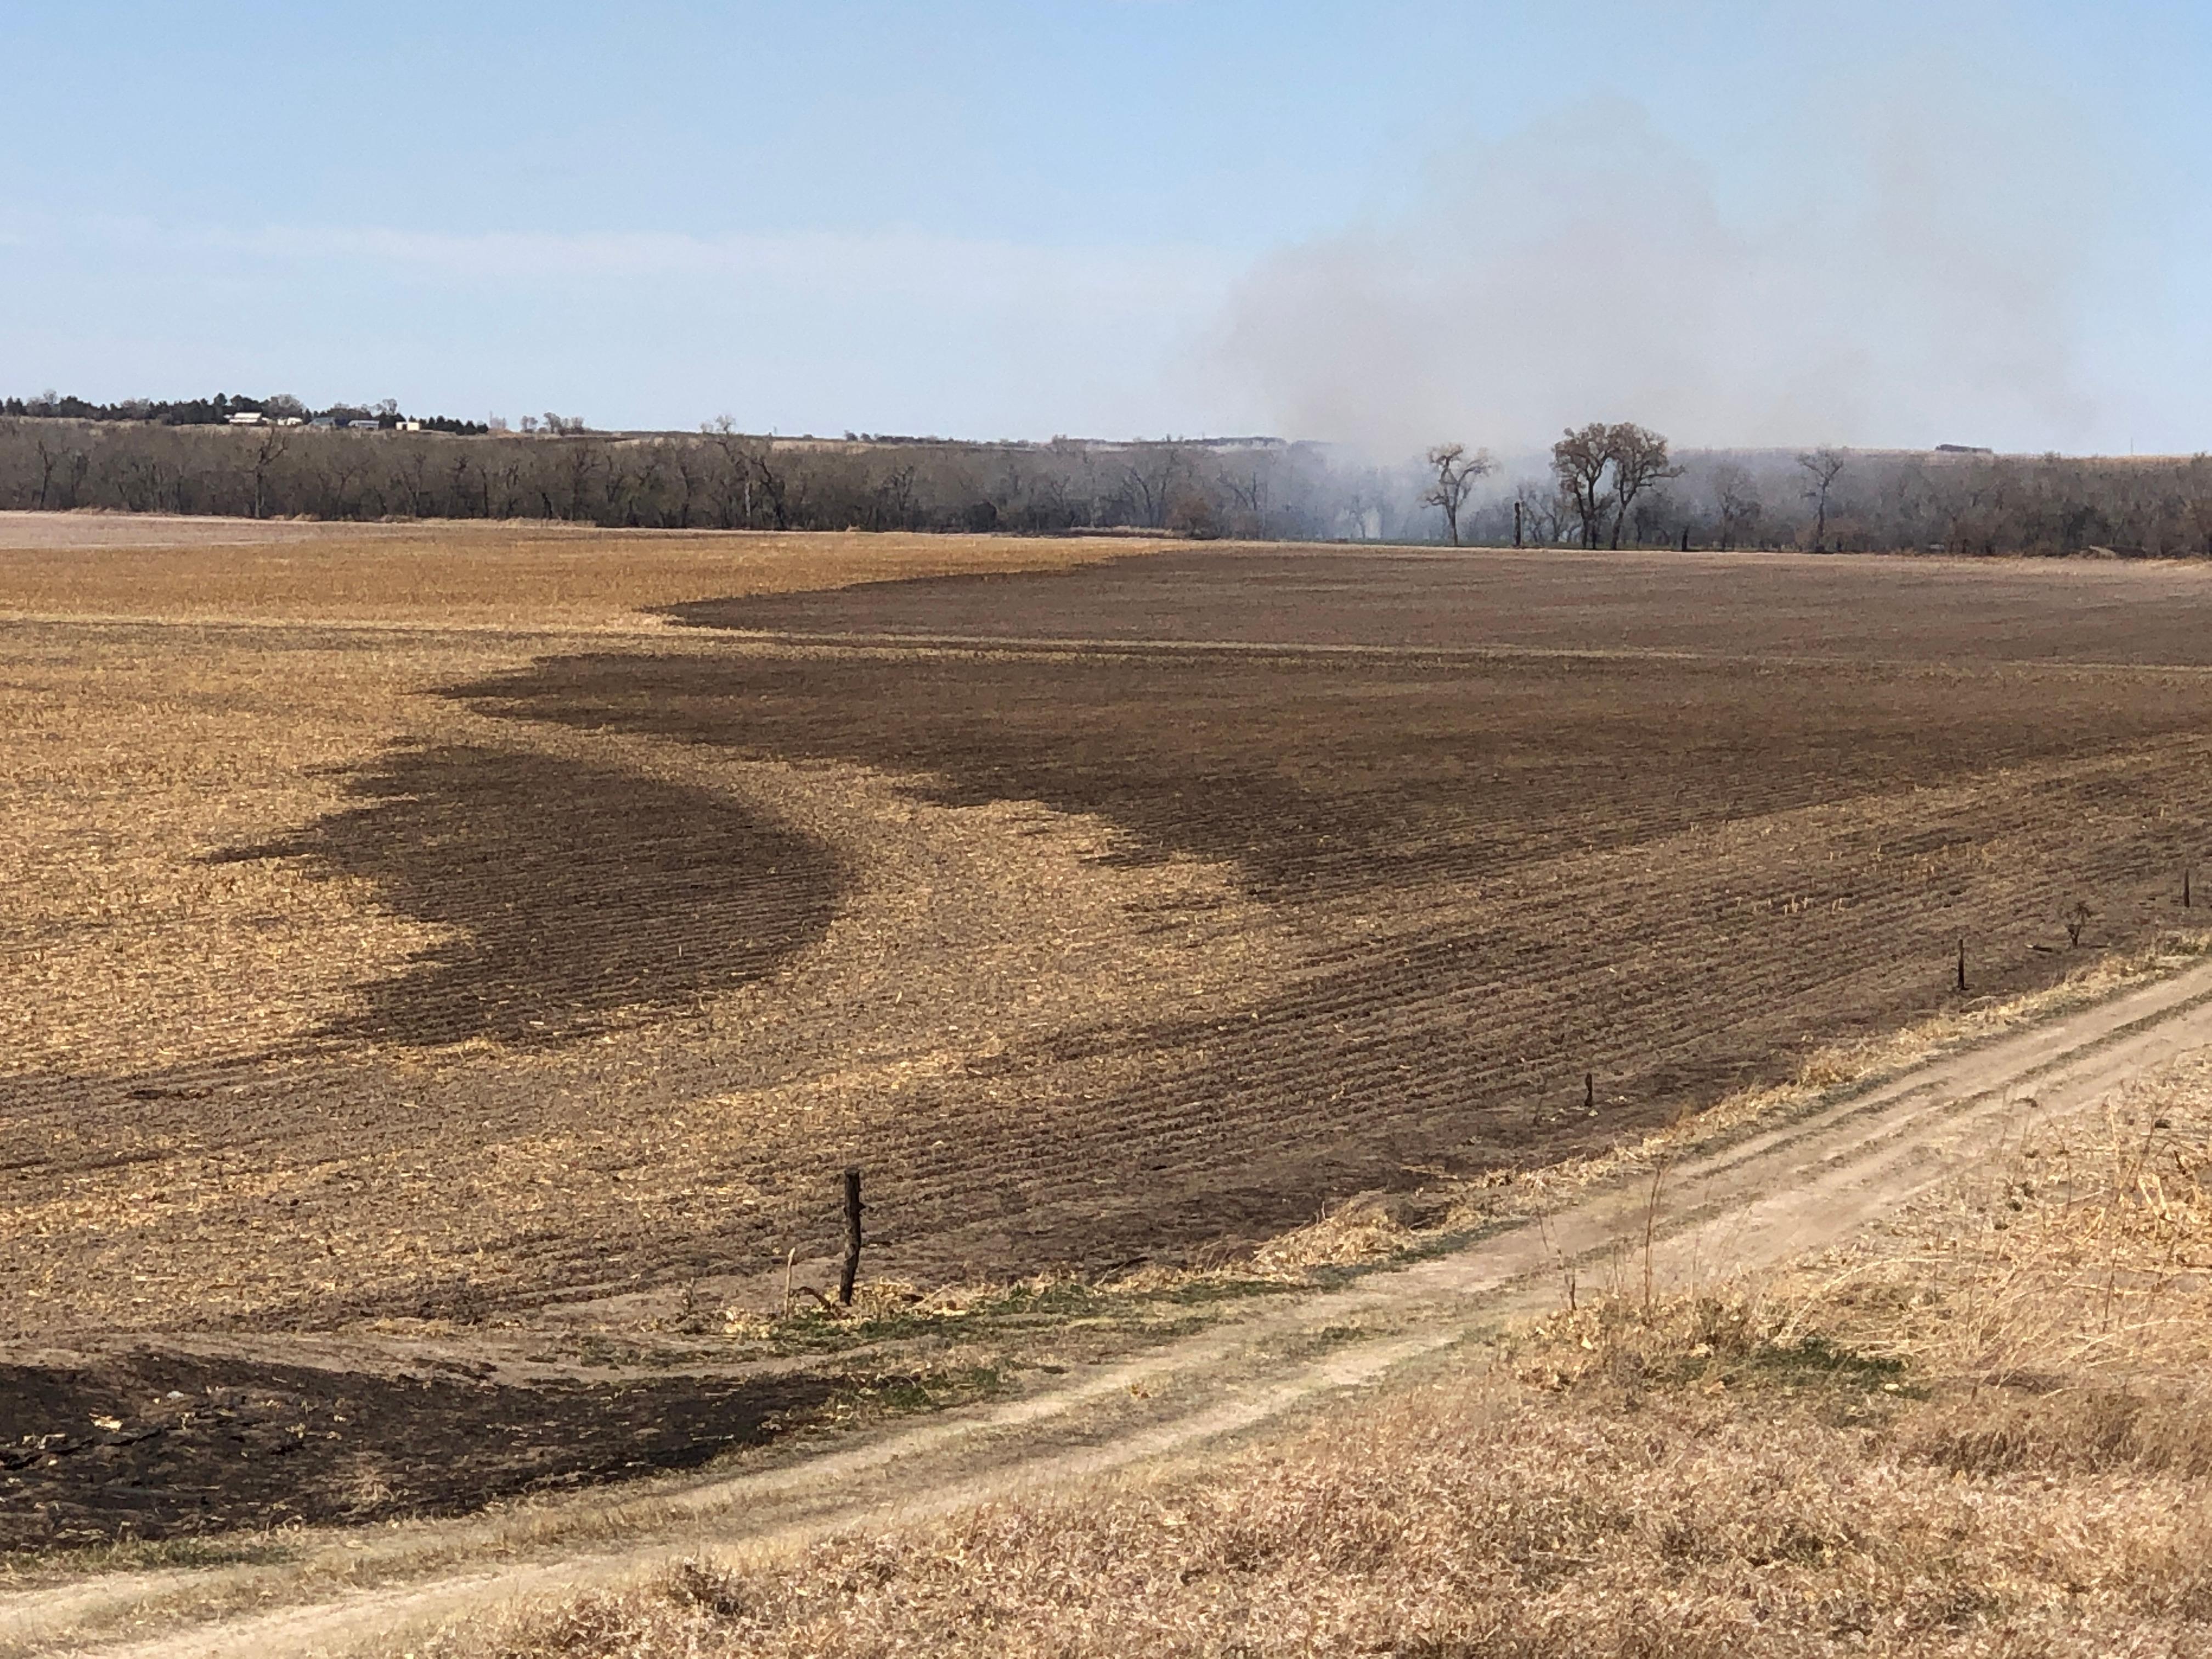 Burn within agricultural field